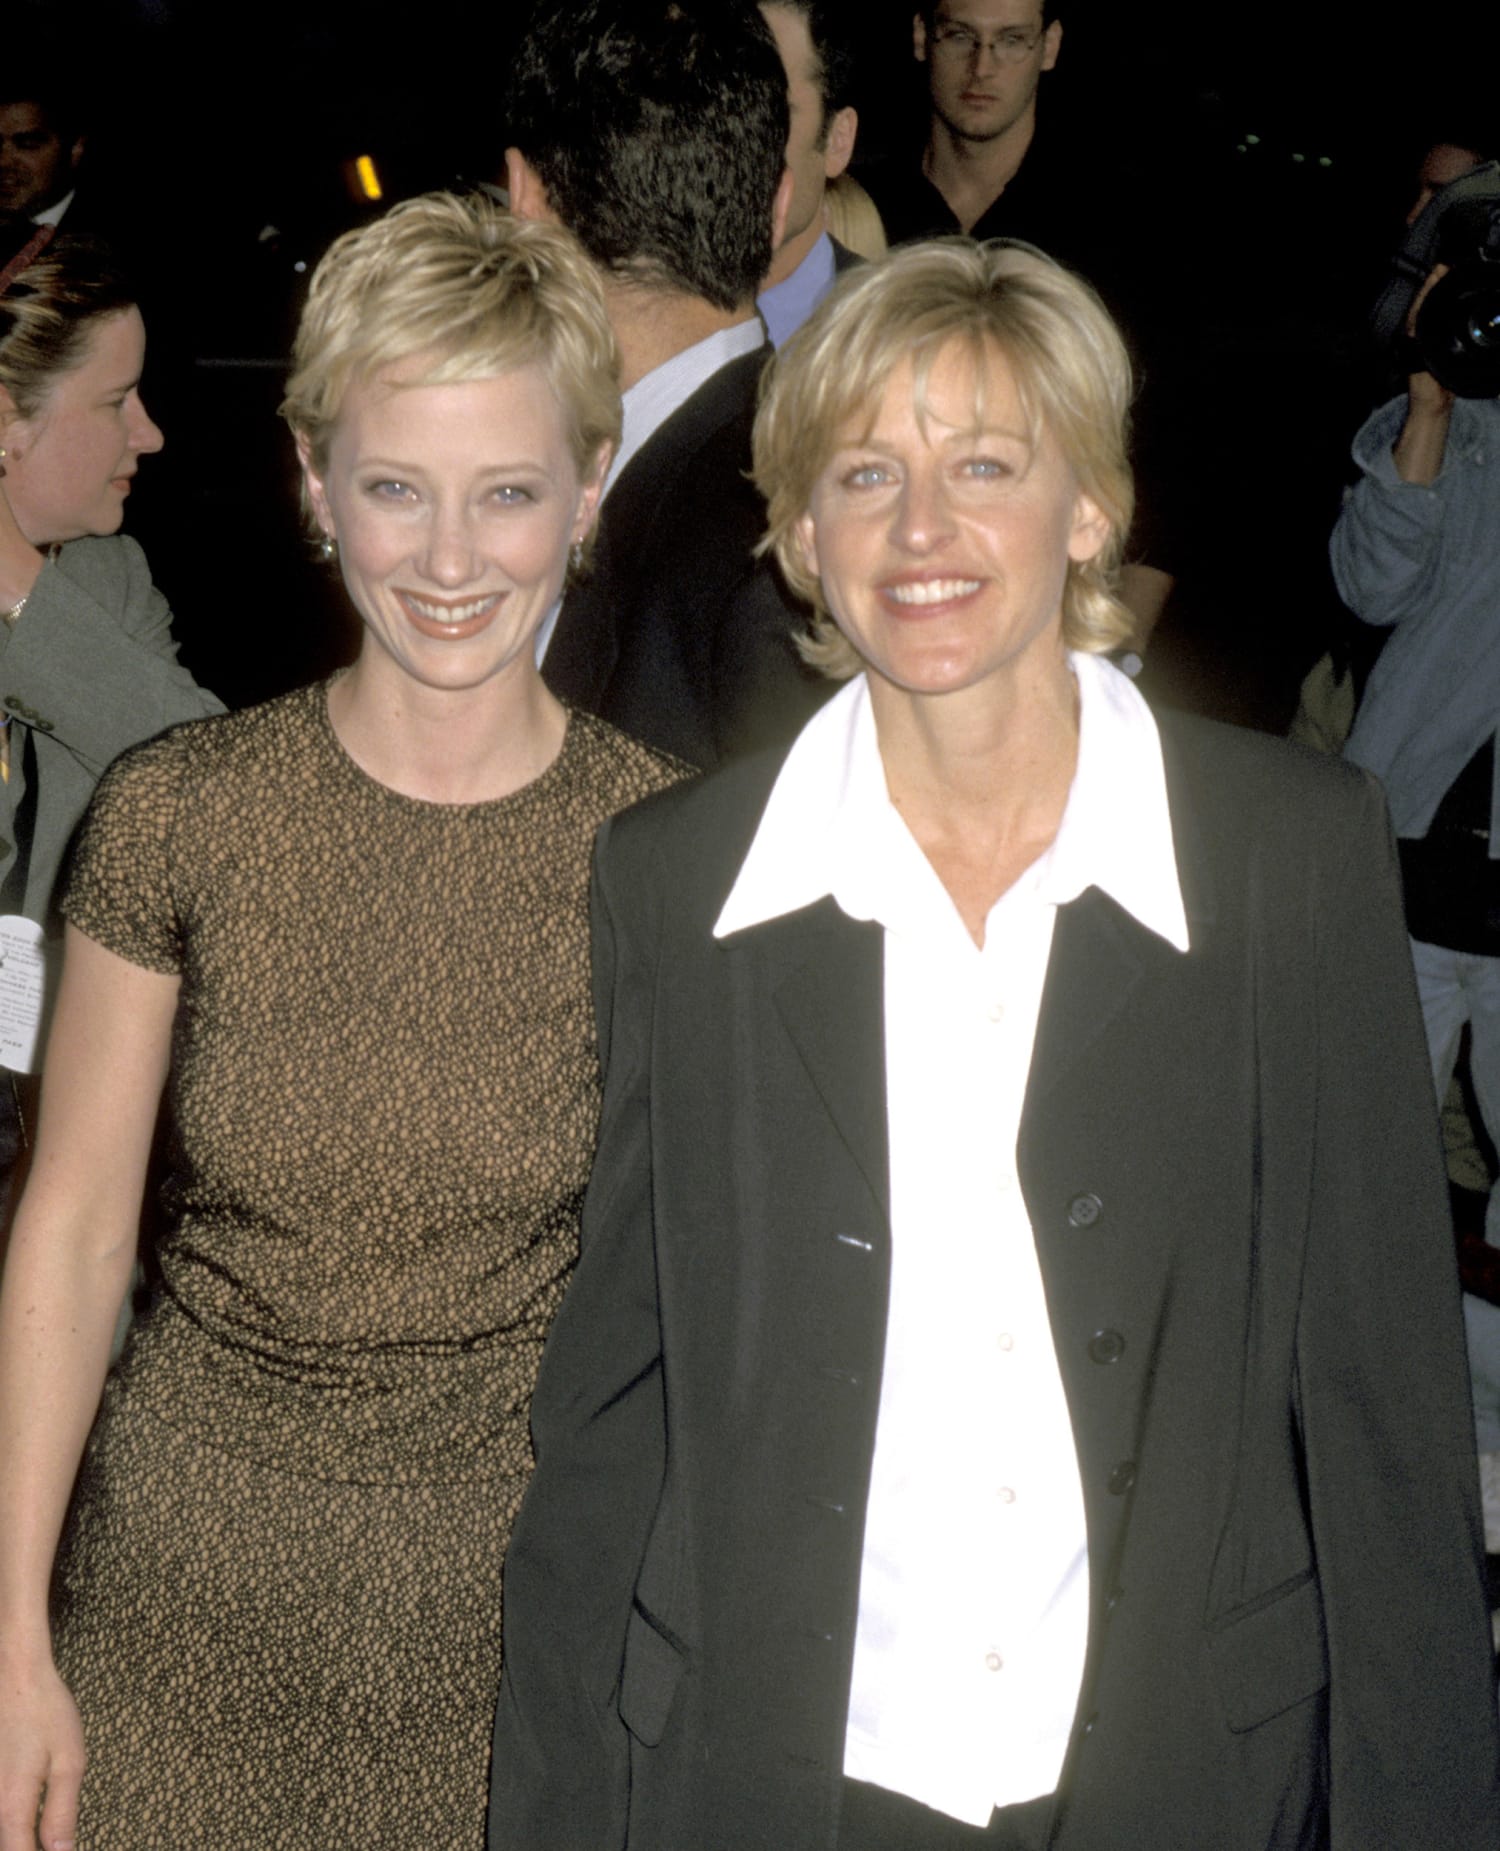 Anne now is who heche dating Anne Heche: